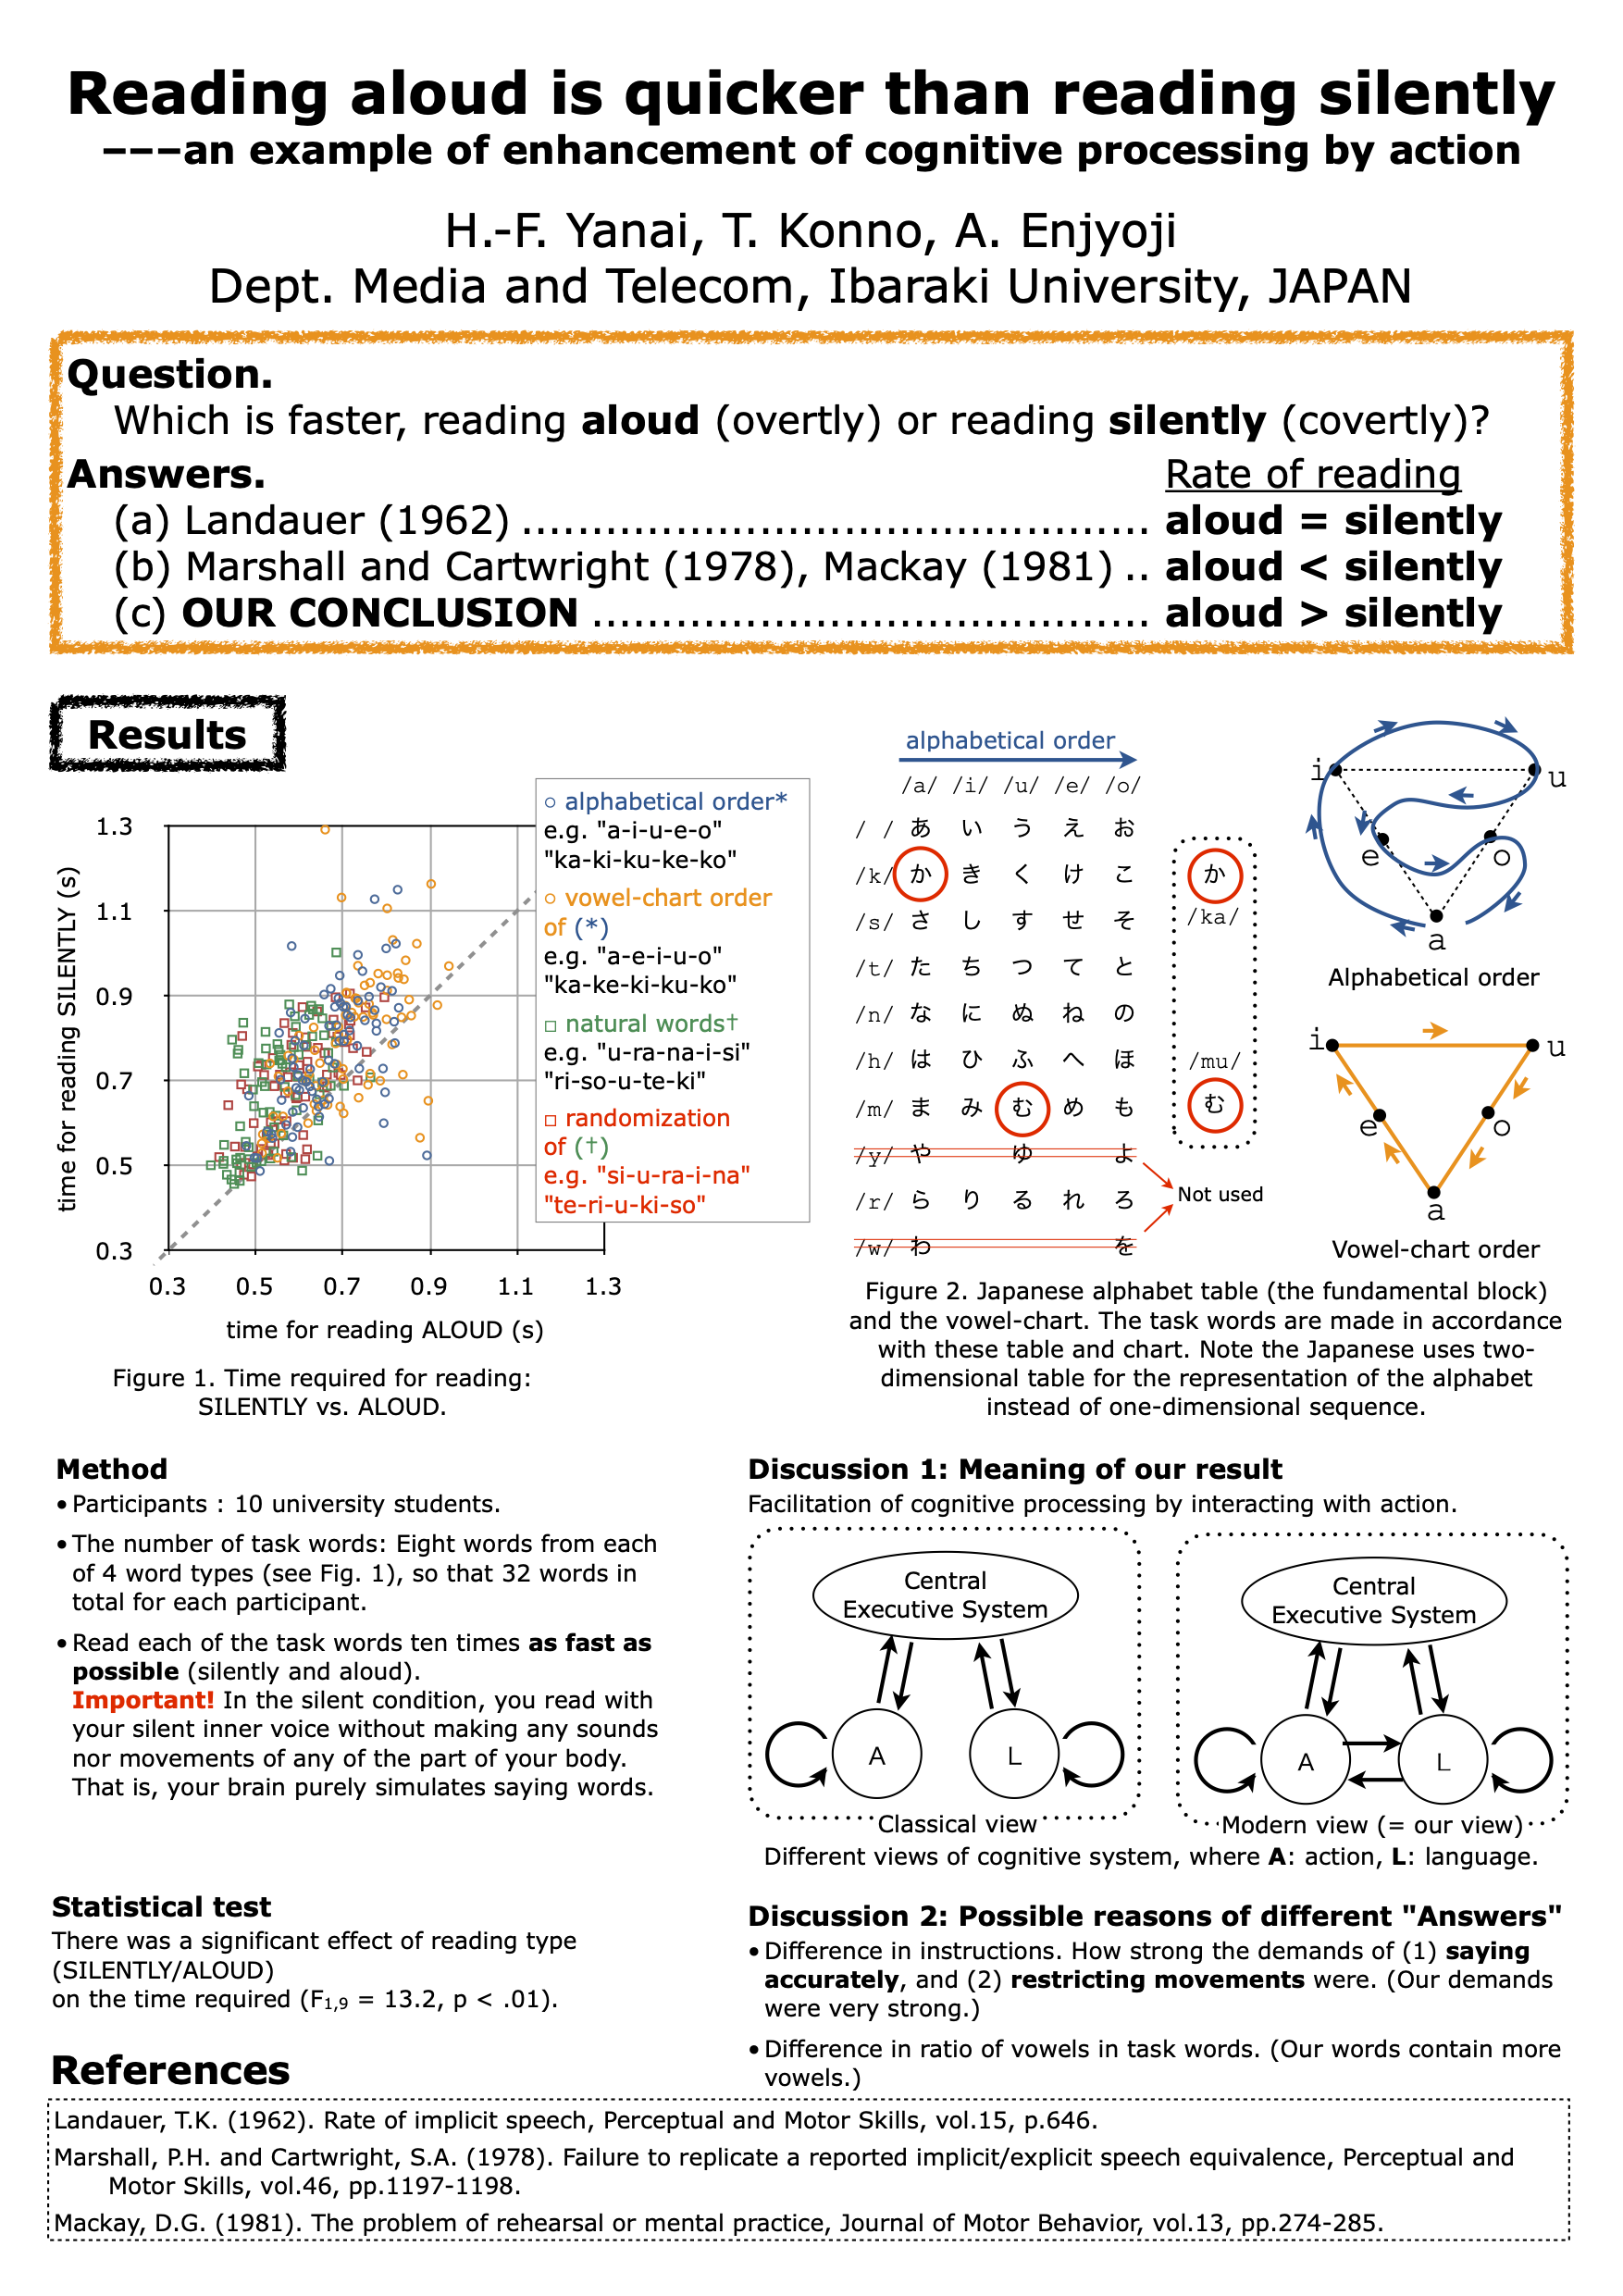 Reading aloud is quicker than reading silently---an example of enhancement of cognitive processing by action（脳内音読よりも口頭音読の方が速い——身体の動作が脳の認知的処理を促進させる例）